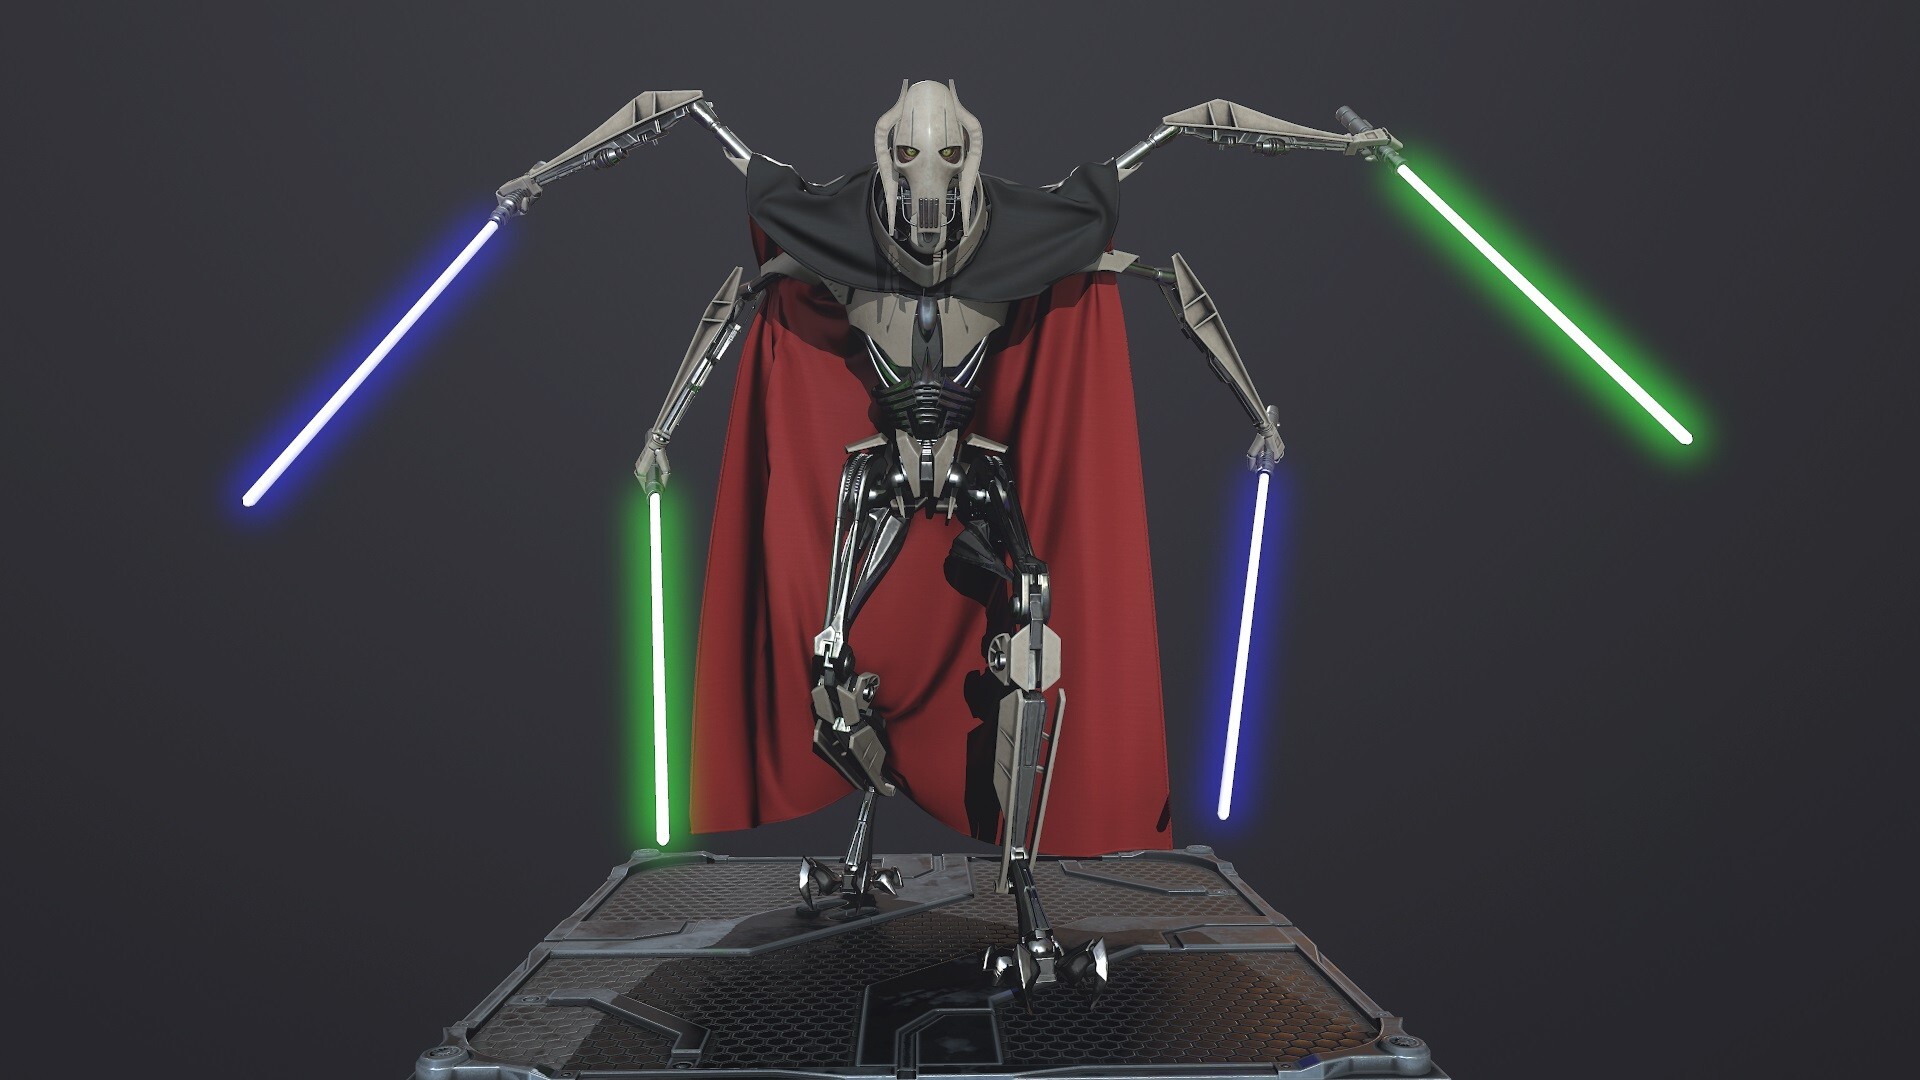 General Grievous: The famous Jedi hunting cyborg, The title of Supreme Martial Commander of the Separatist Droid Armies. 1920x1080 Full HD Wallpaper.